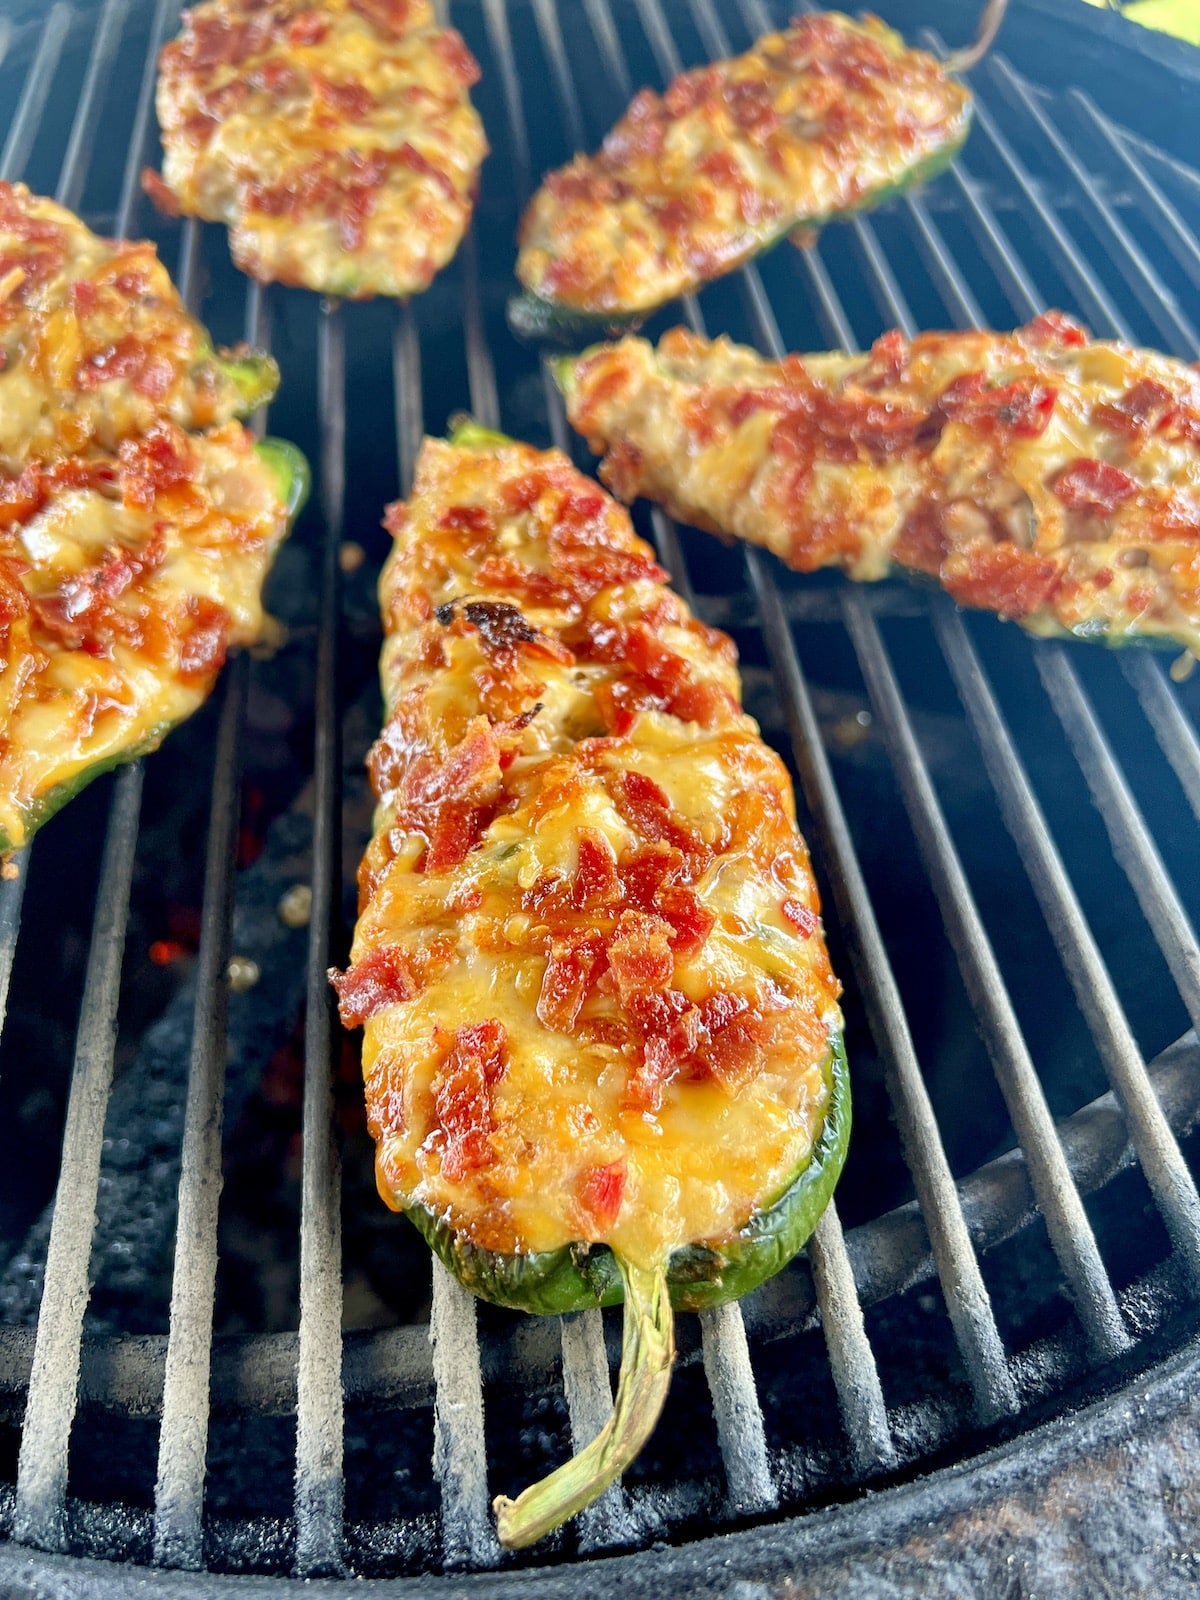 Grilling chicken stuffed poblano peppers with bacon and cheese.